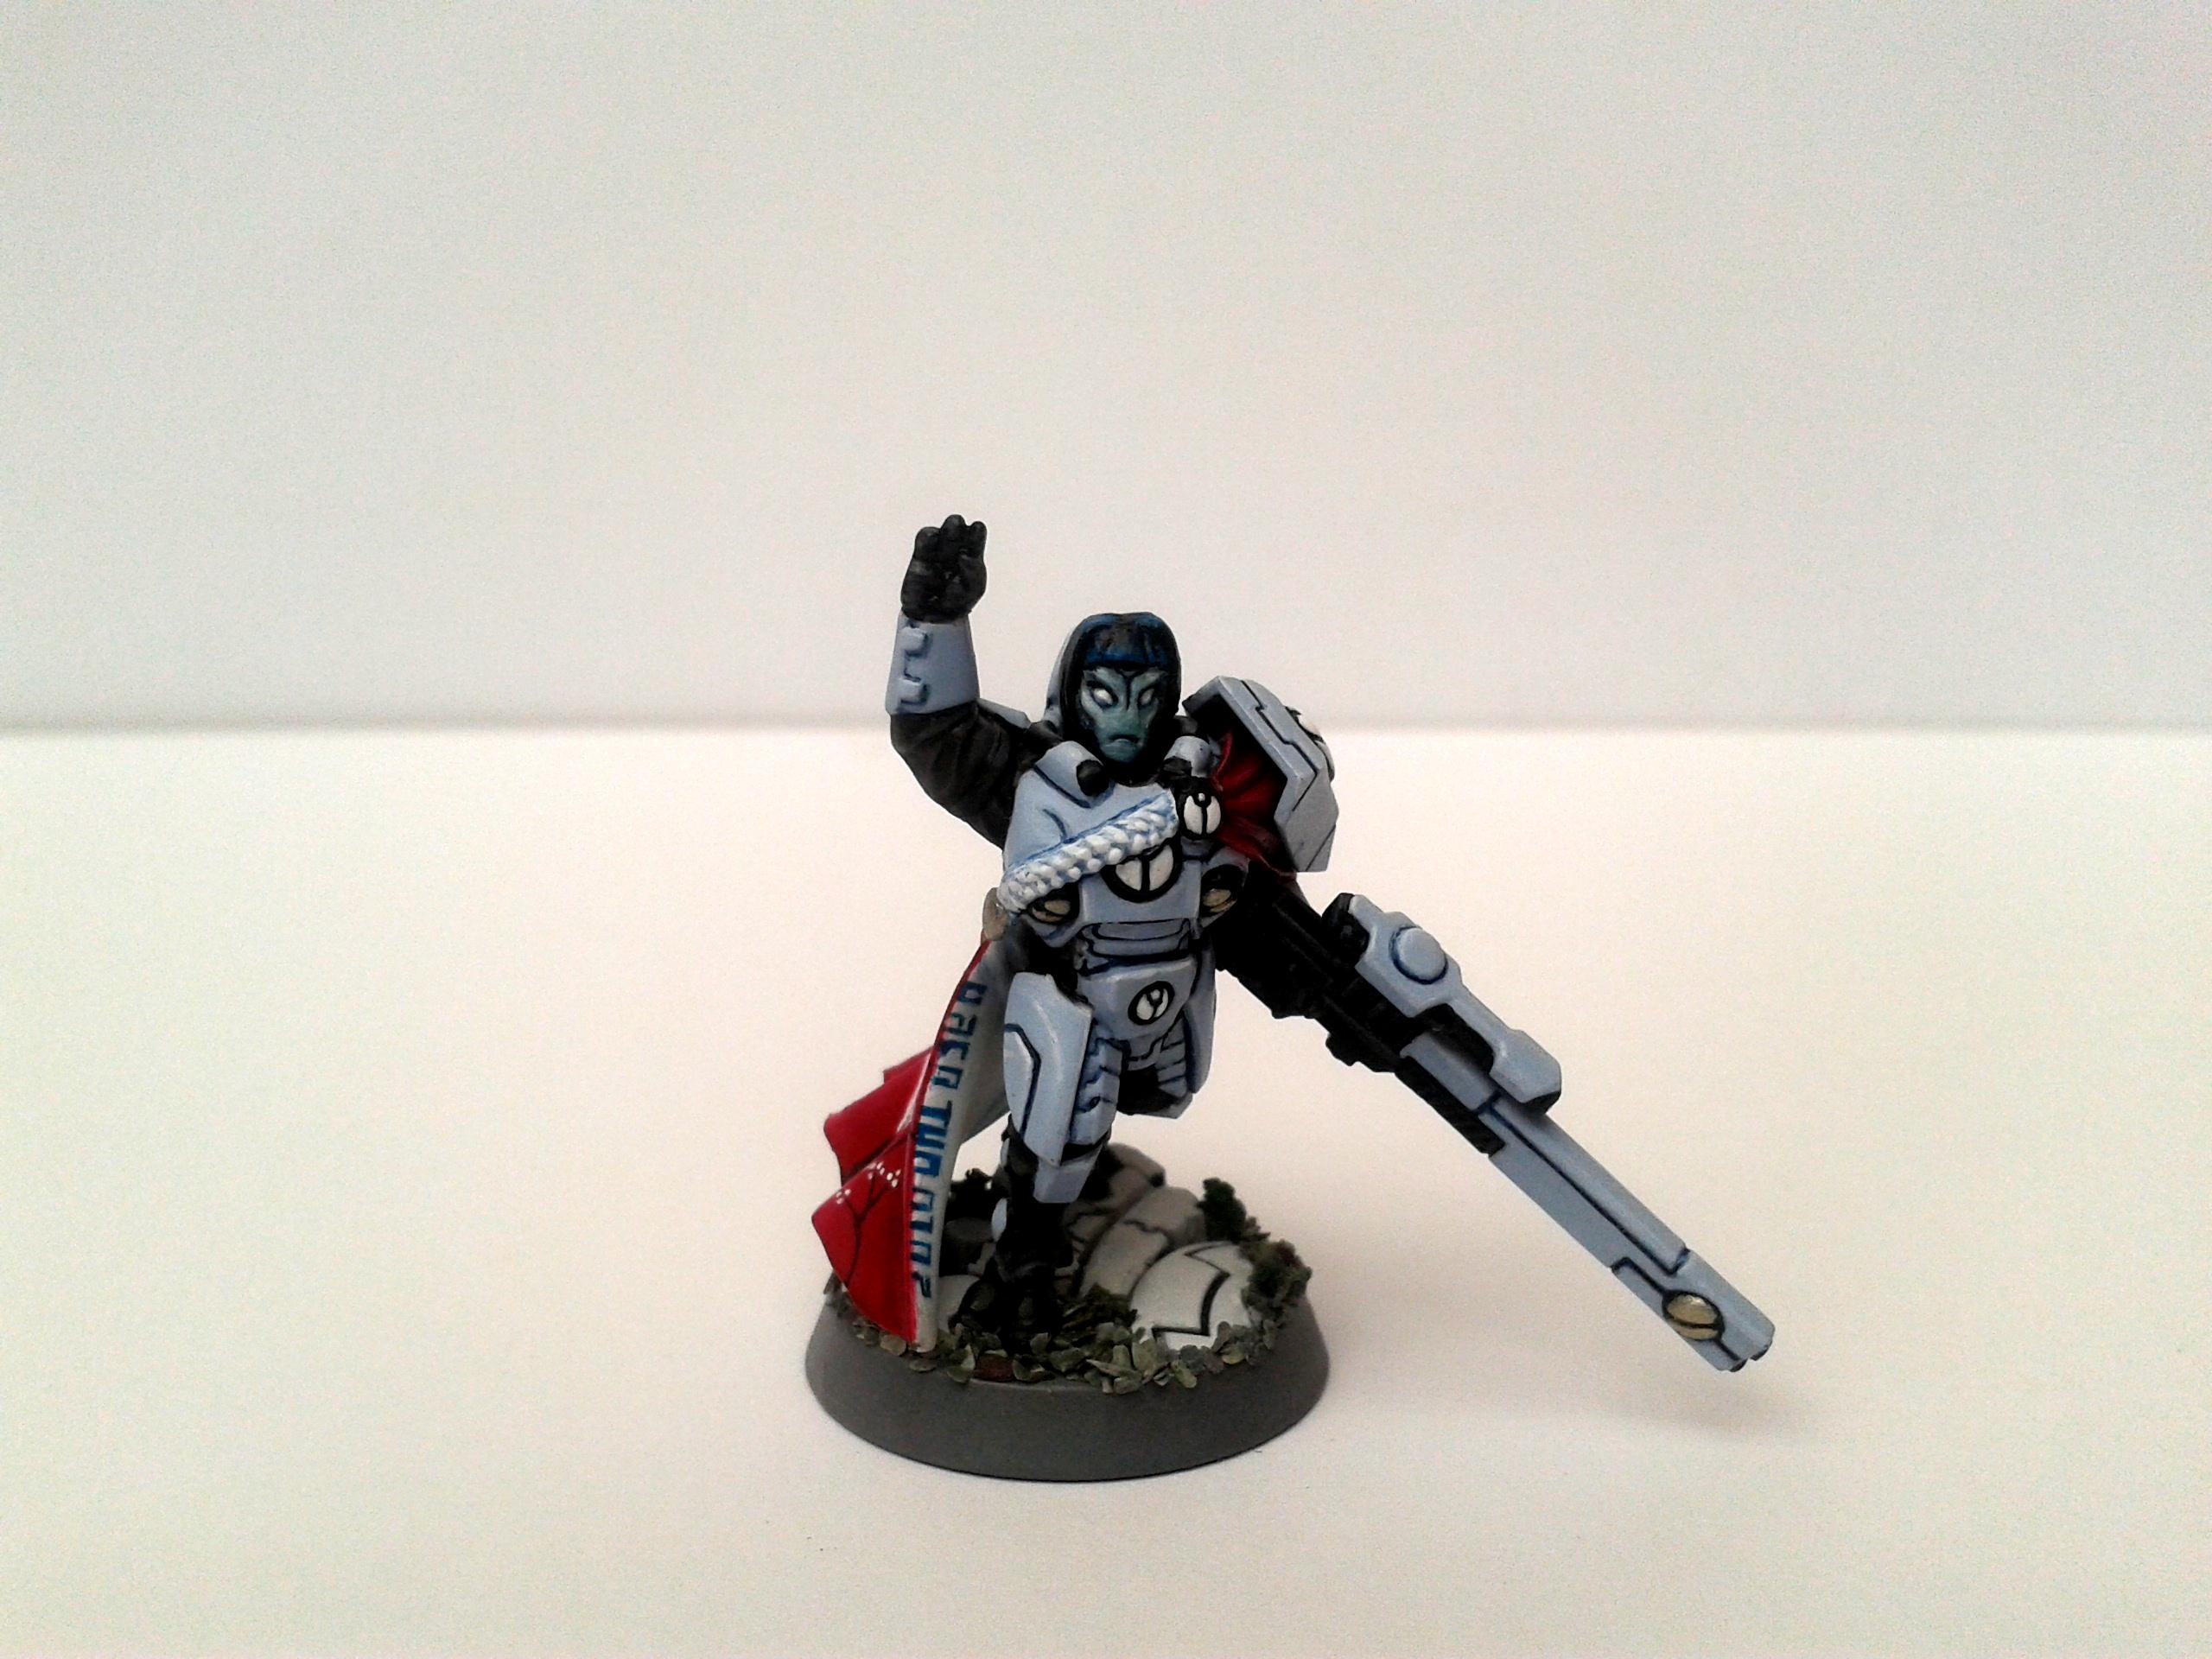 Battlesuit, Blue, Bork'an, Broadsides, Camouflage, Caste, Drone, Fire, Free, Freehand, Gun, Hand, Pathfinders, Pulse, Red, Rifle, Sept, Shield, Snow, Tau, Turquoise, Warriors